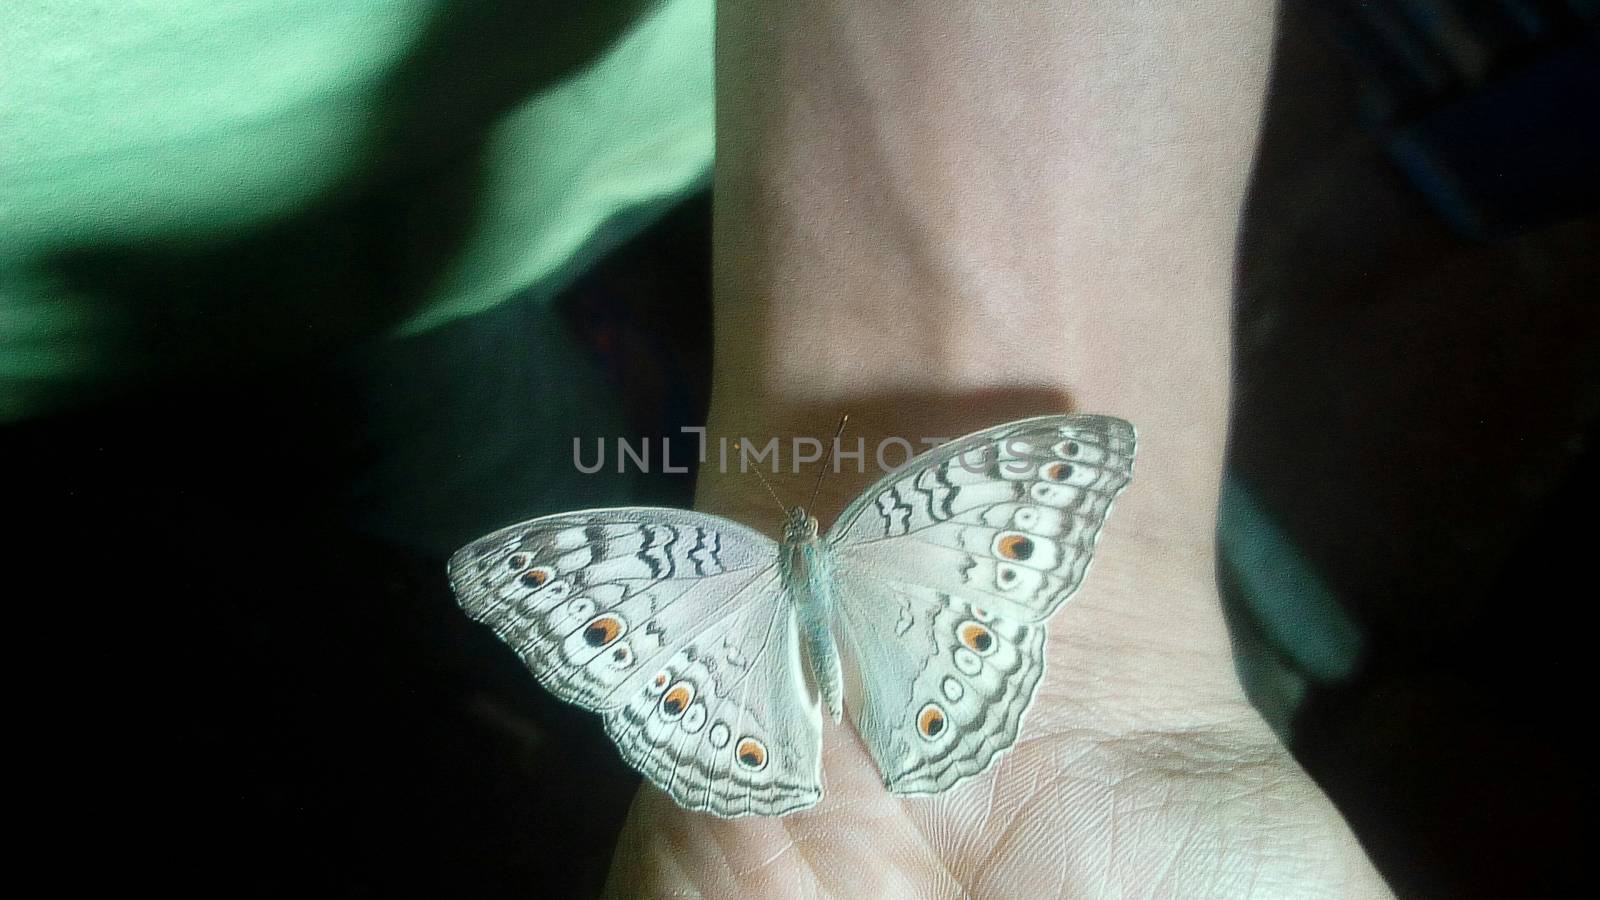 looking nice butterfly on hand by jahidul2358